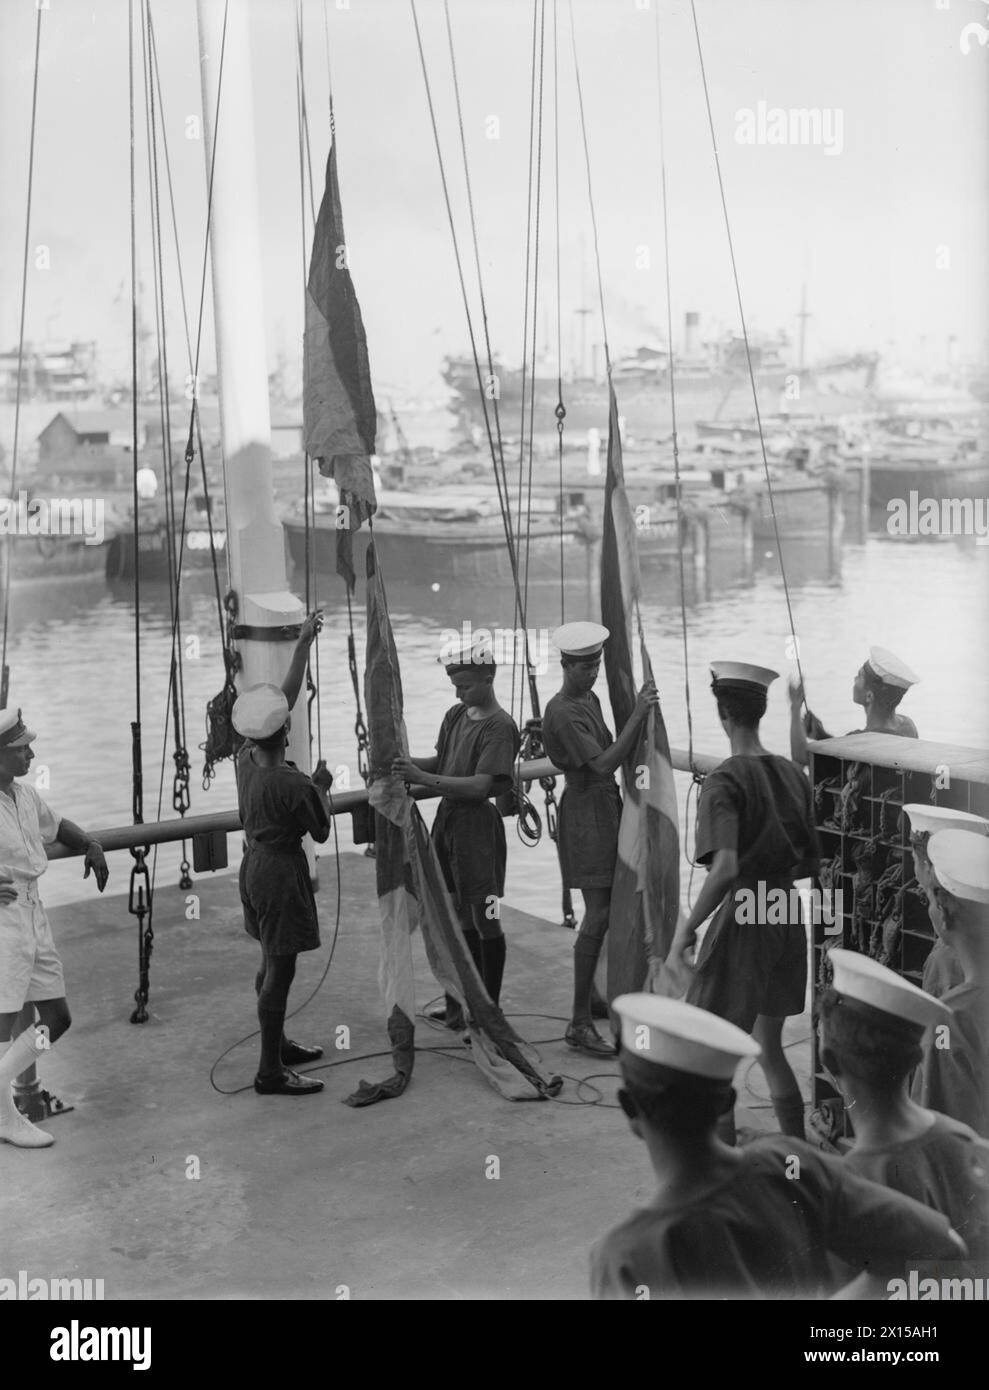 THE CEYLON RNVR ON WAR SERVICE. 1942, COLOMBO, CEYLON. OFFICERS AND MEN OF THE CEYLON RNVR, MANNING PATROL VESSELS AND MINESWEEPERS ROUND THE ISLAND. MEN IN TRAINING AND ON ACTIVE SERVICE. - Sinhalese ratings of the Ceylon RNVR undergoing instruction in signalling Stock Photo